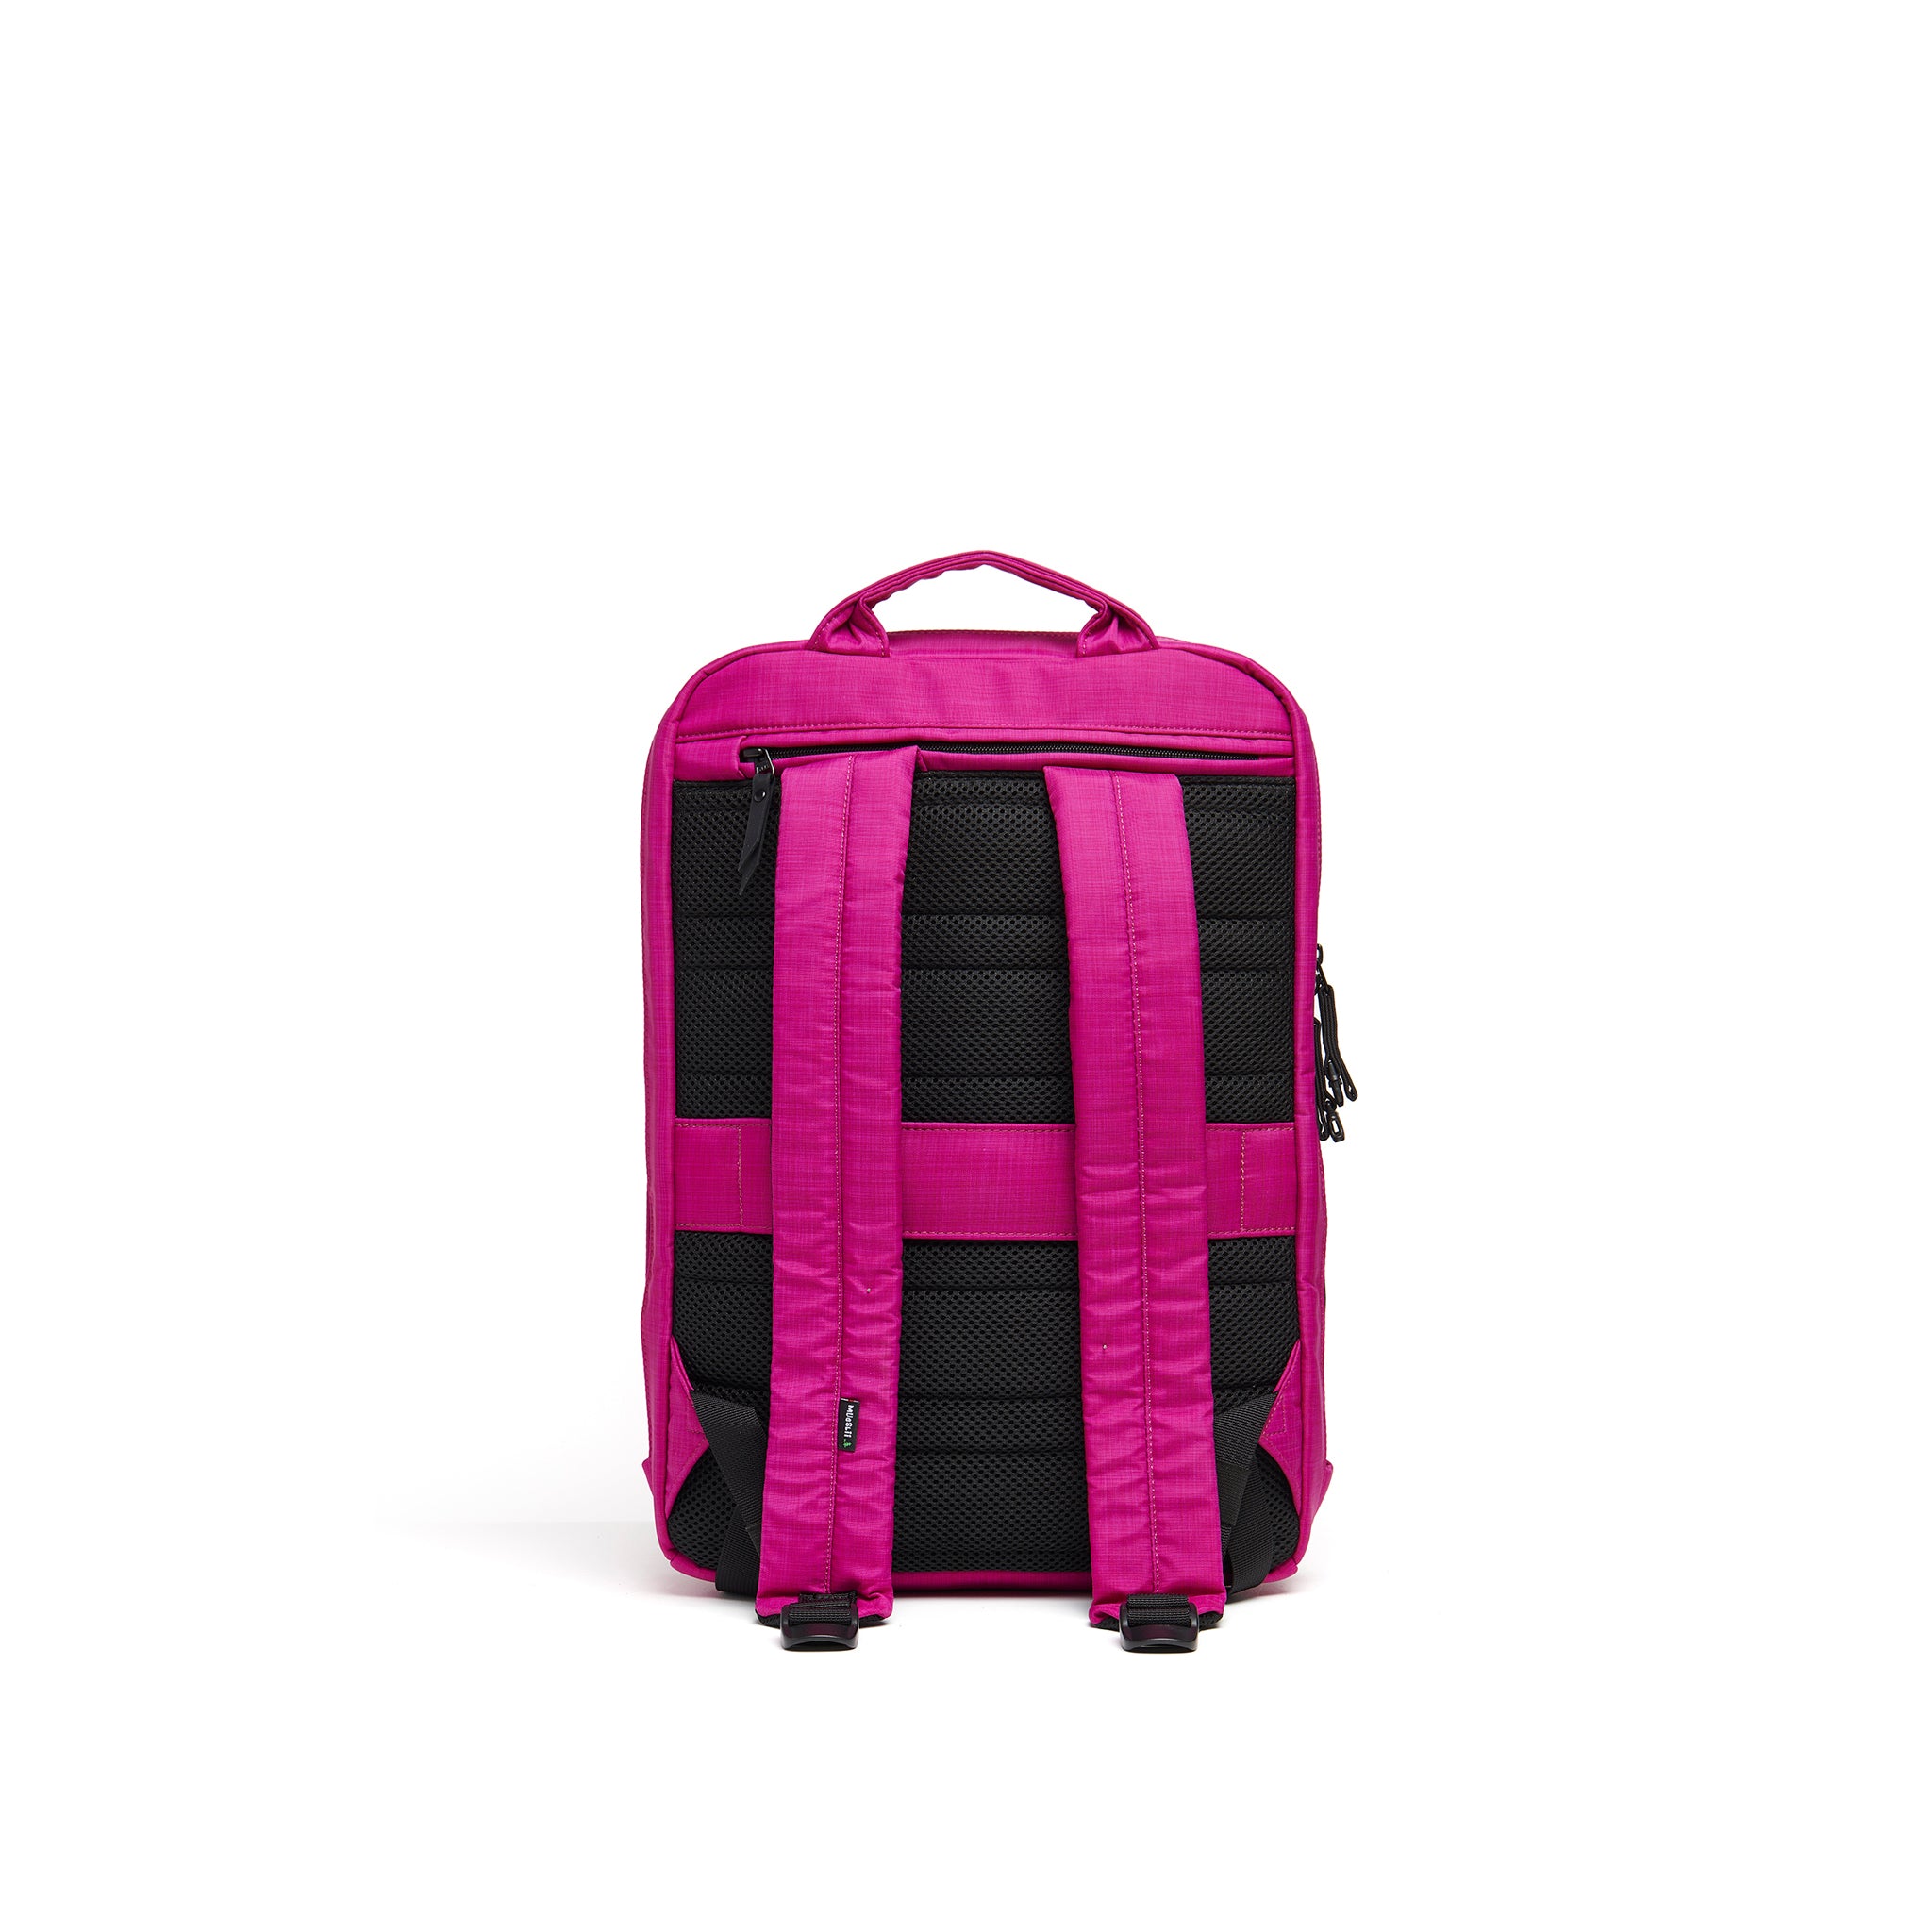 Mueslii small backpack,  made of  water resistant canvas nylon,  with a laptop compartment, color fuchsia, back view.